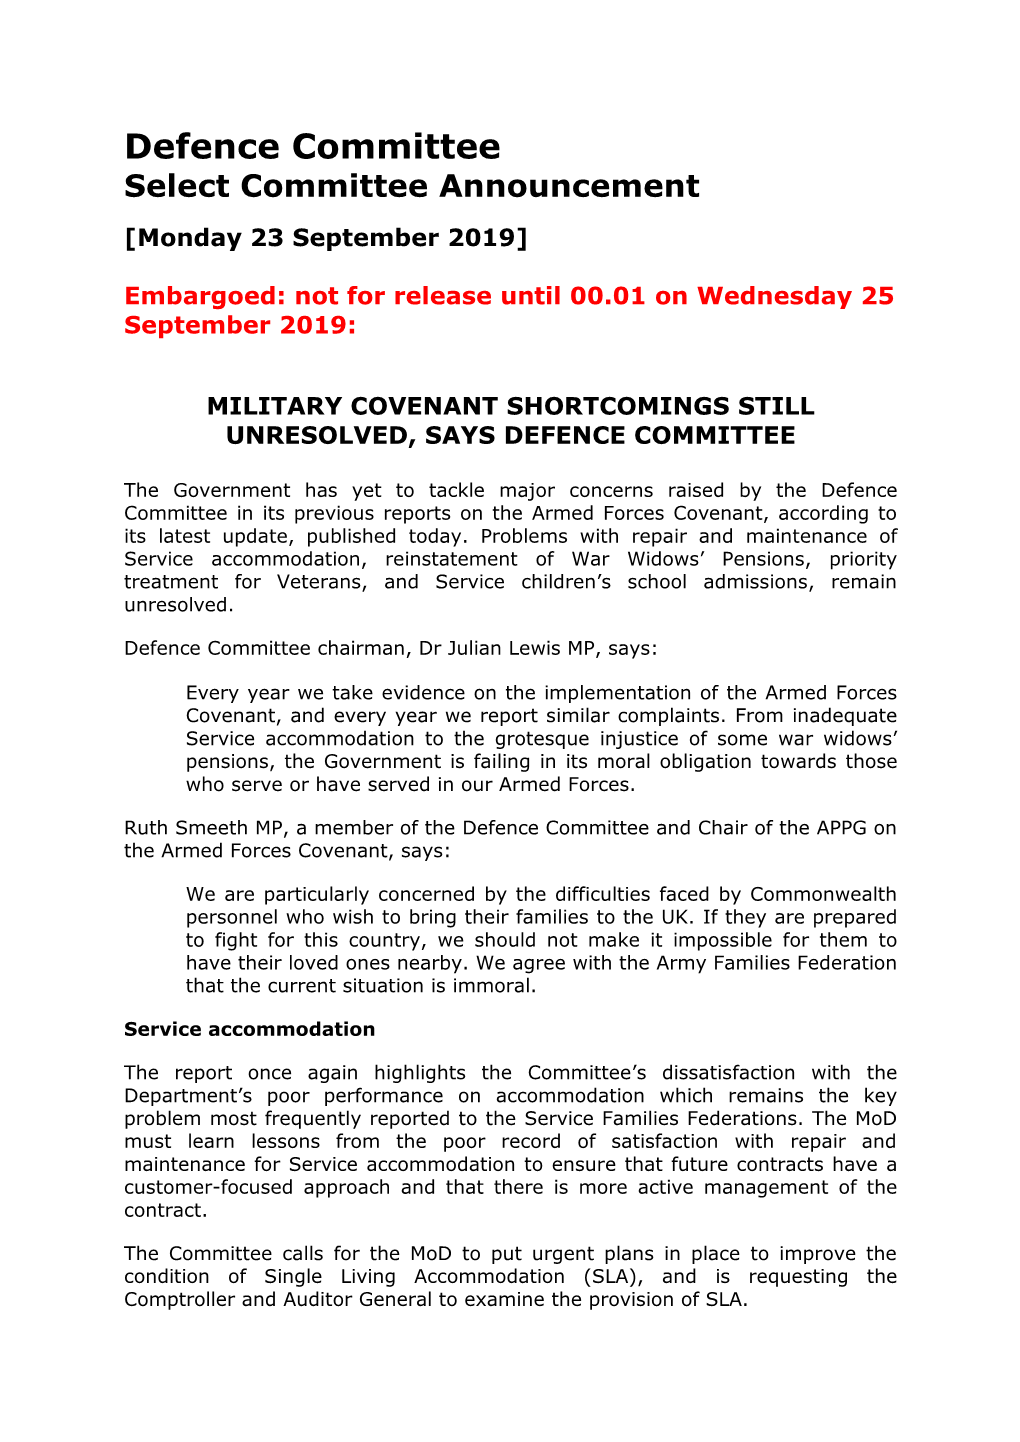 Defence Committee Select Committee Announcement